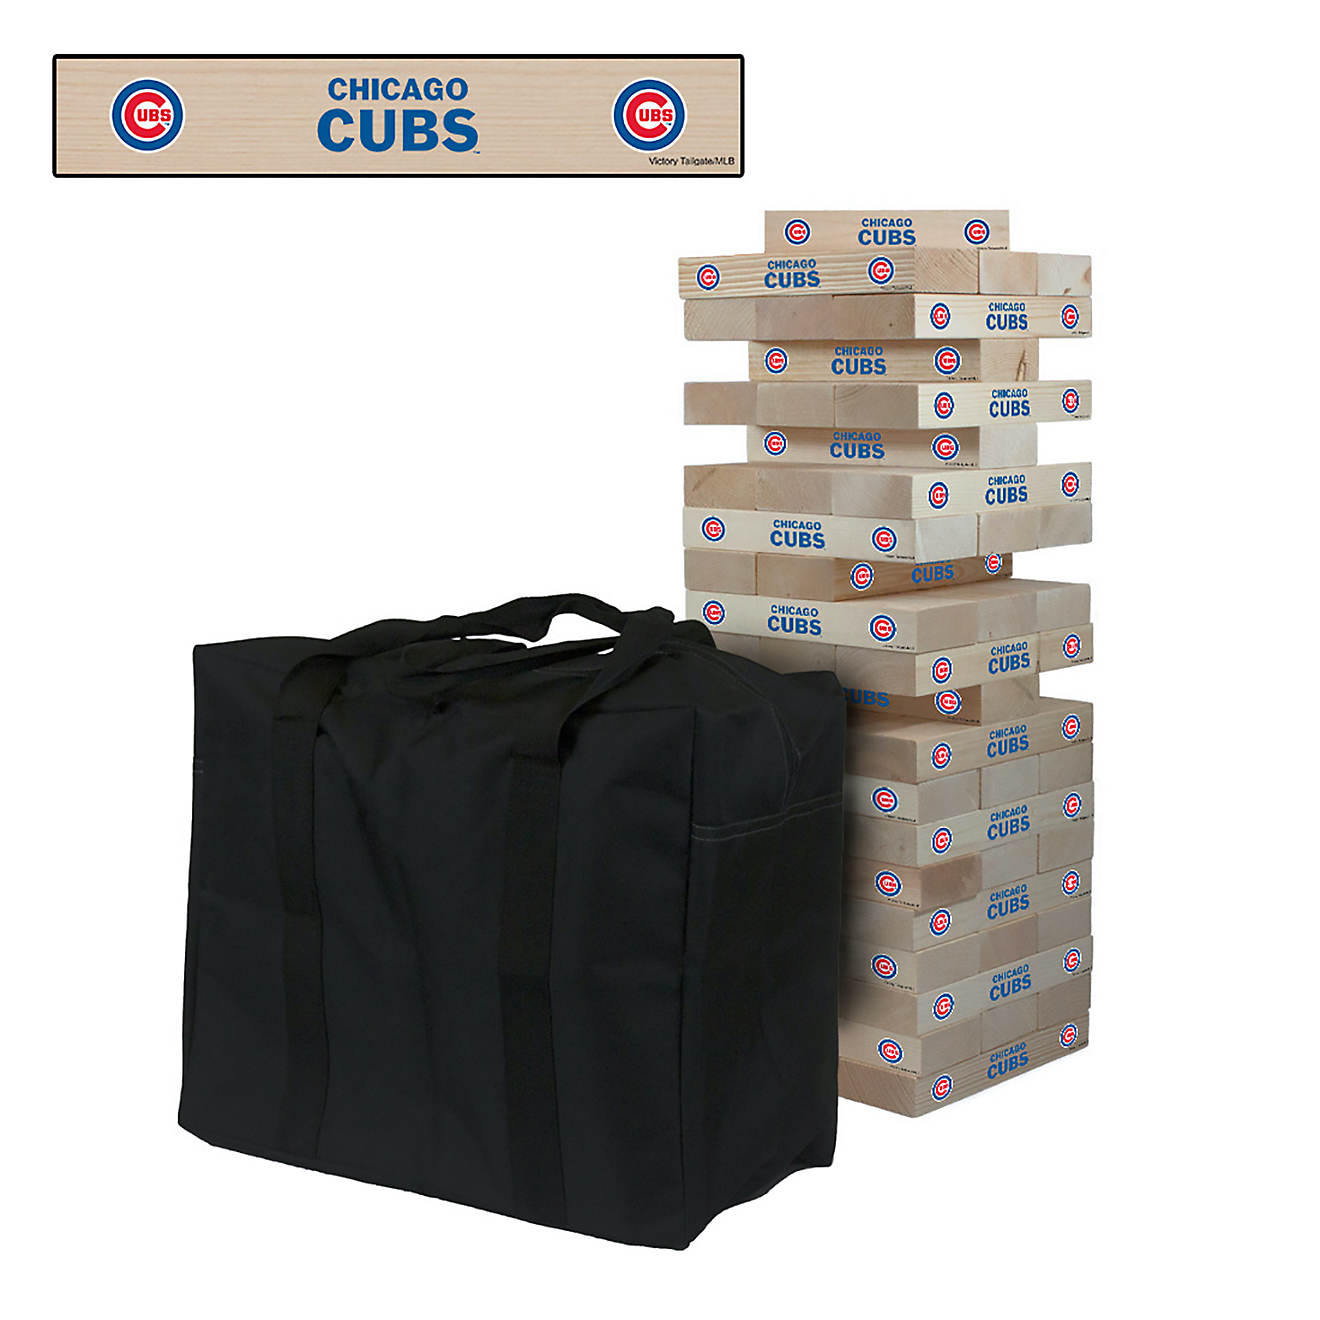 Victory Tailgate Chicago Cubs Giant Wooden Tumble Tower Game                                                                     - view number 1